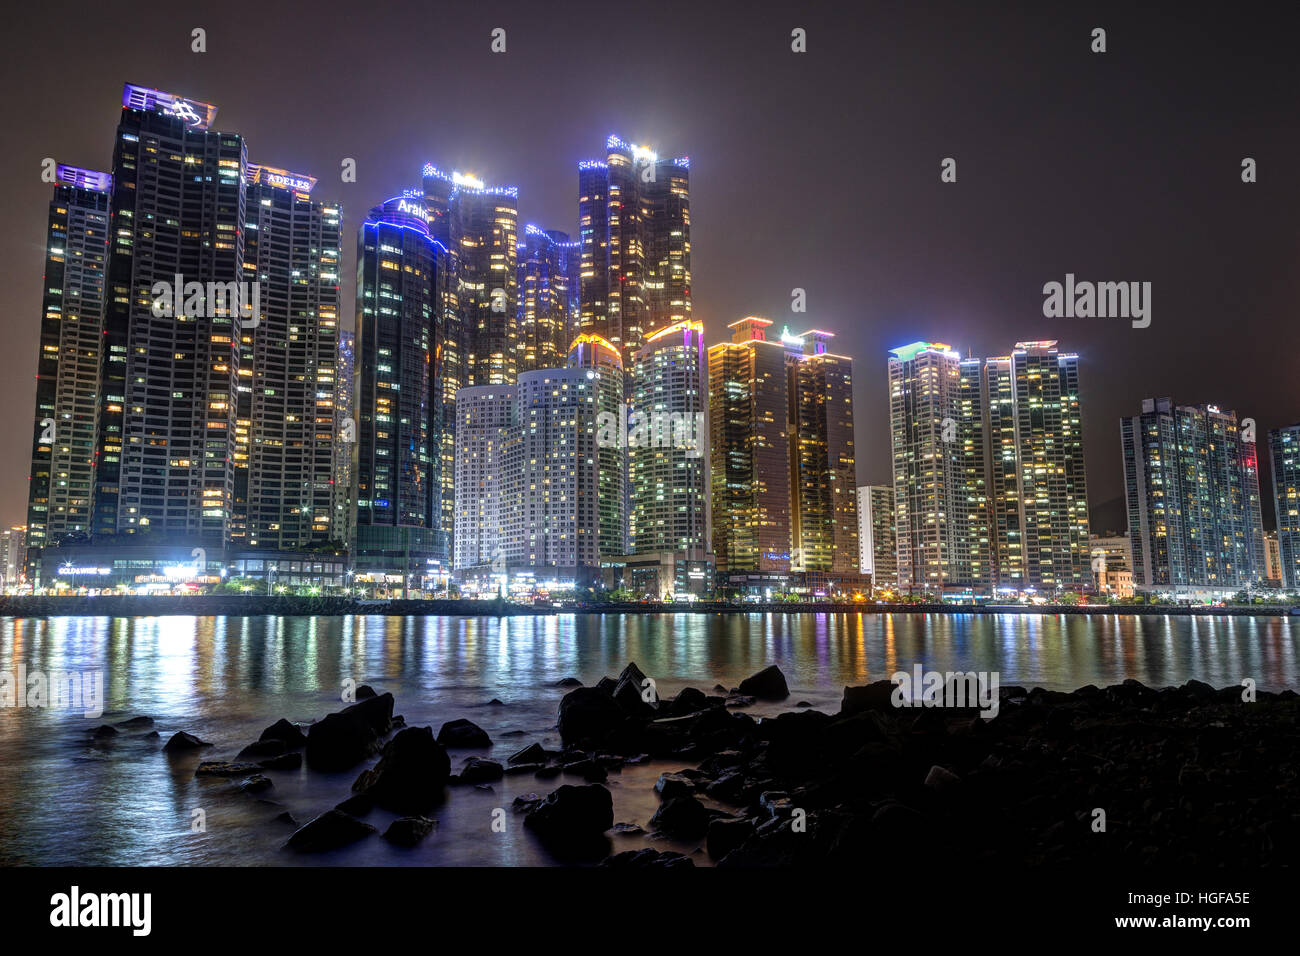 View of skyscrapers at the Marine City residential area in Haeundae waterfront district in Busan, South Korea, at night. Stock Photo